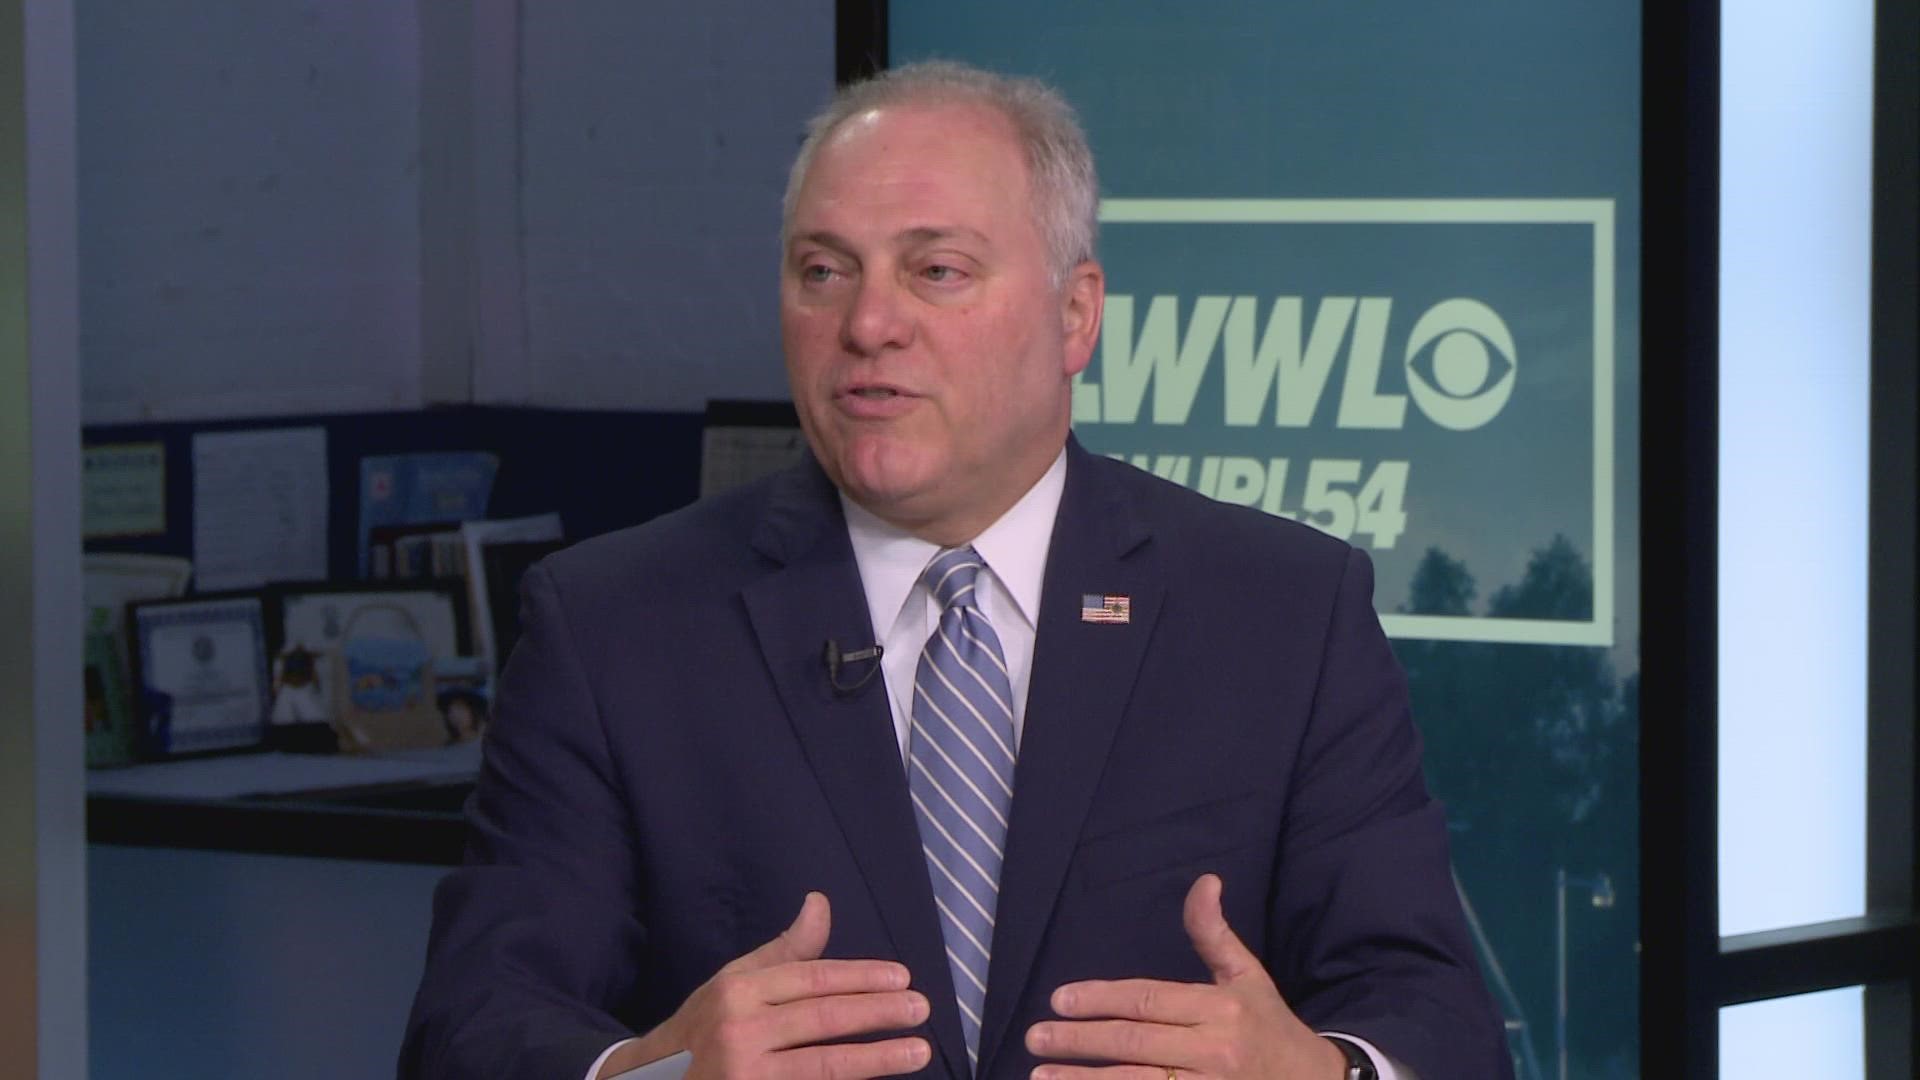 Interview House Minority Whip Steve Scalise on election